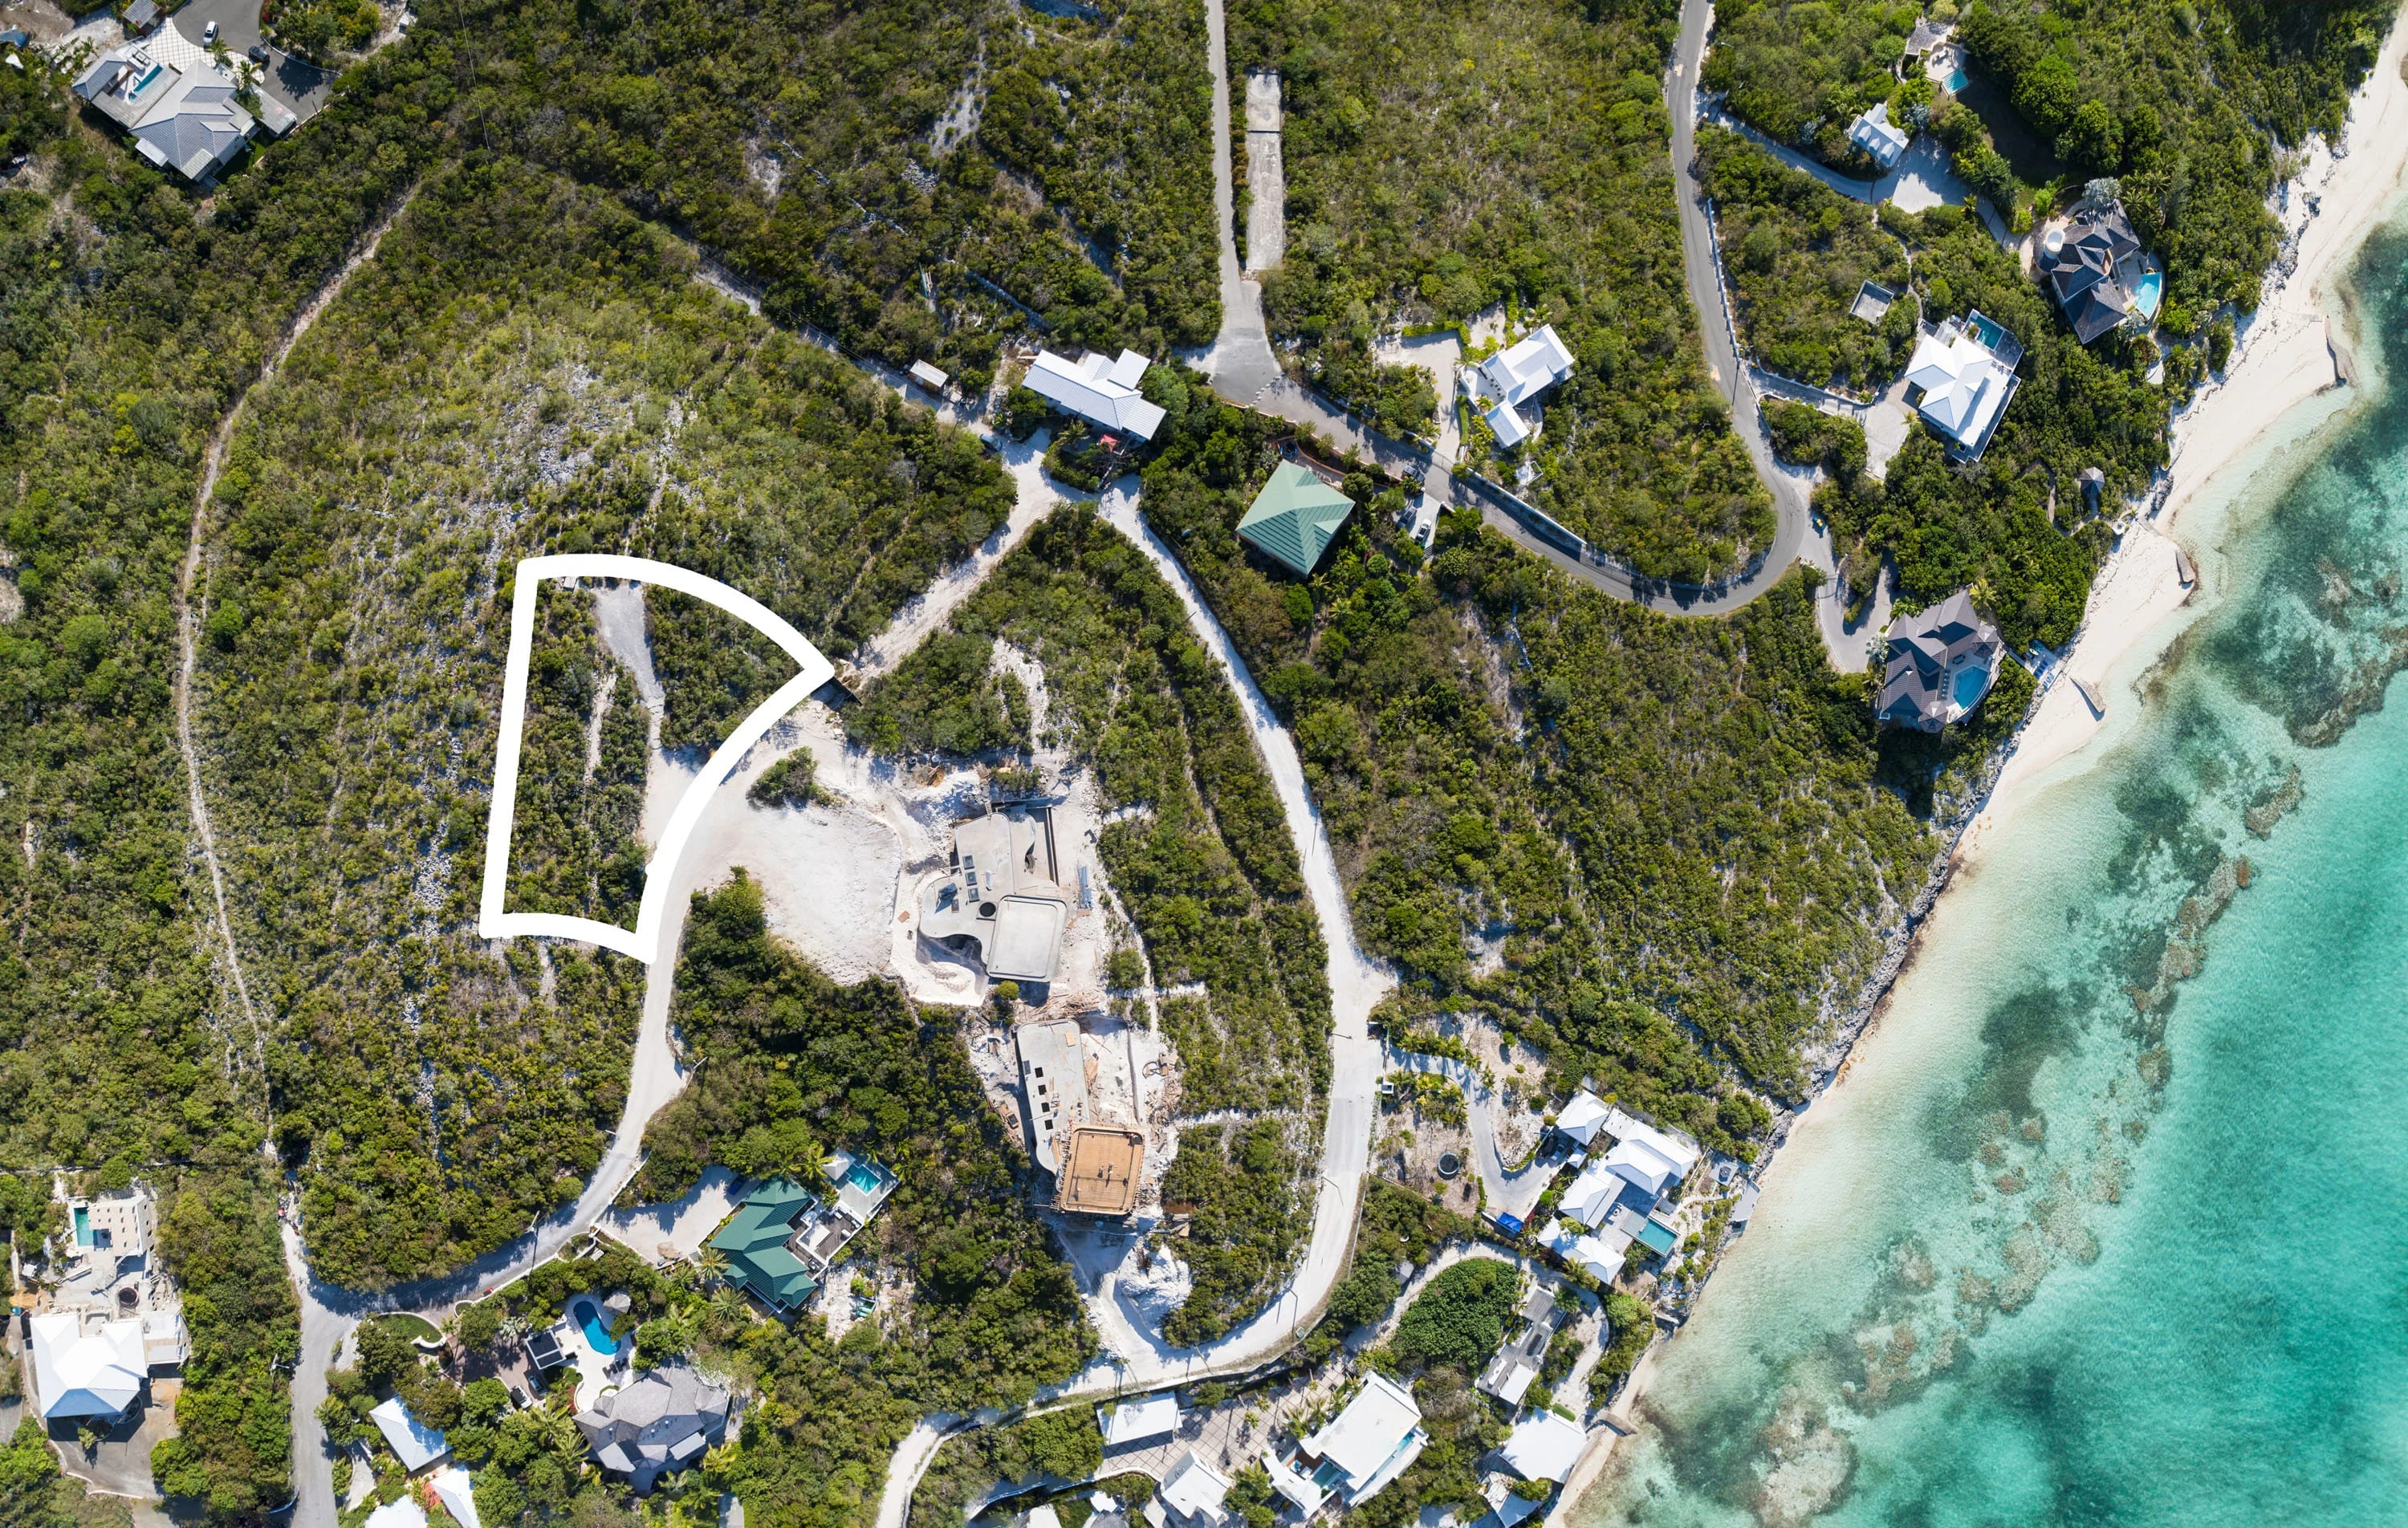 Lot 11 | Blue Mountain Providenciales Turks & Caicos | Concierge Auctions | Luxury Real Estate 